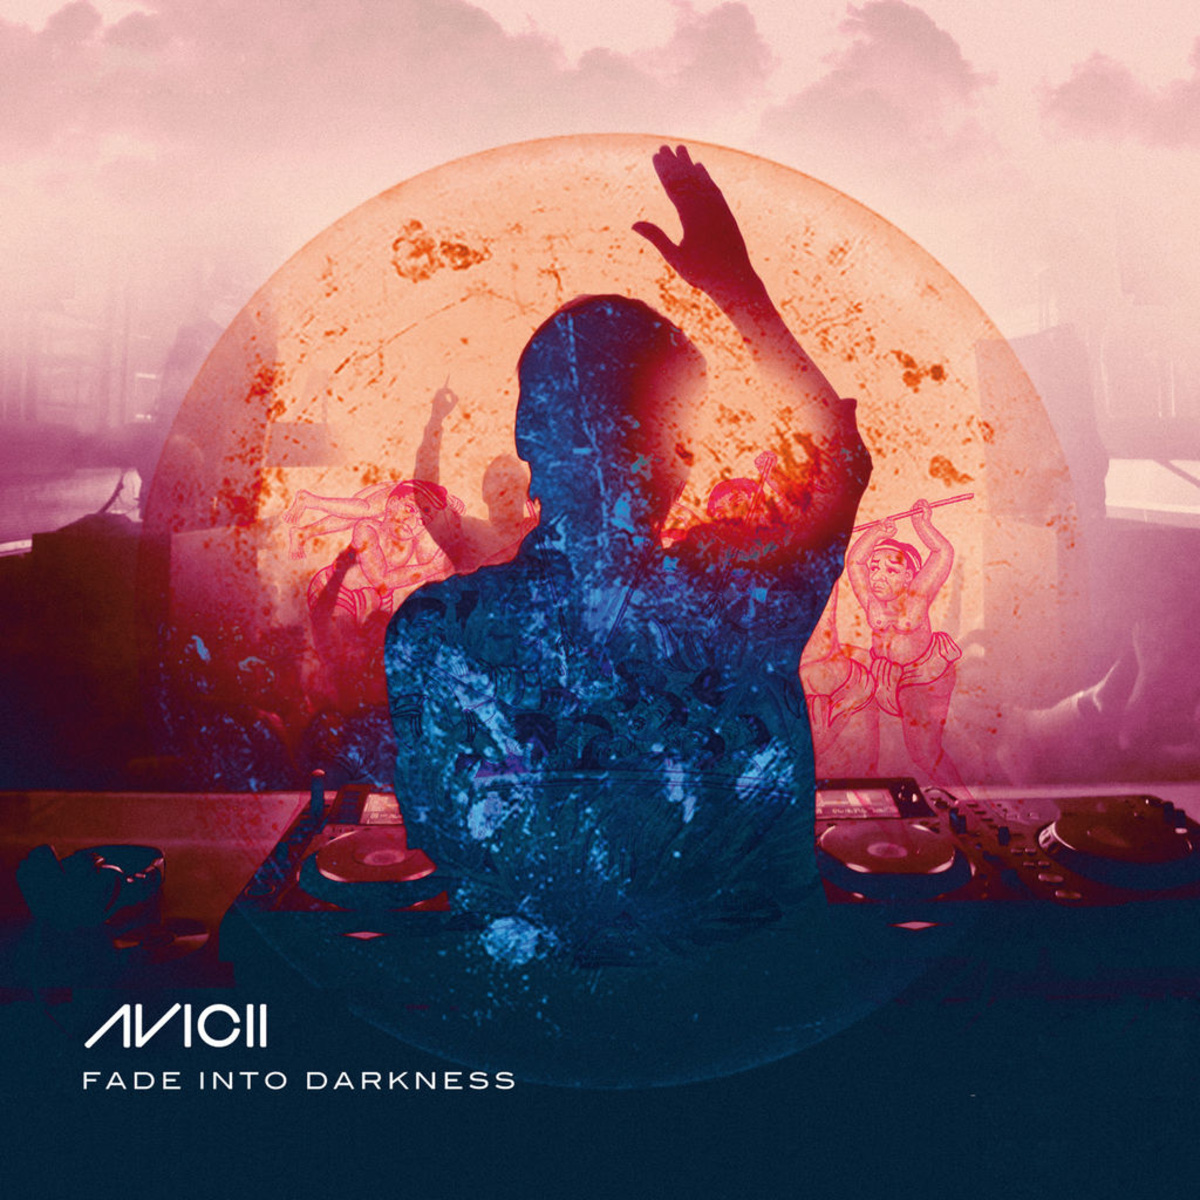 Fade Into Darkness (Vocal Club Mix)歌词 歌手Avicii-专辑Fade Into Darkness-单曲《Fade Into Darkness (Vocal Club Mix)》LRC歌词下载